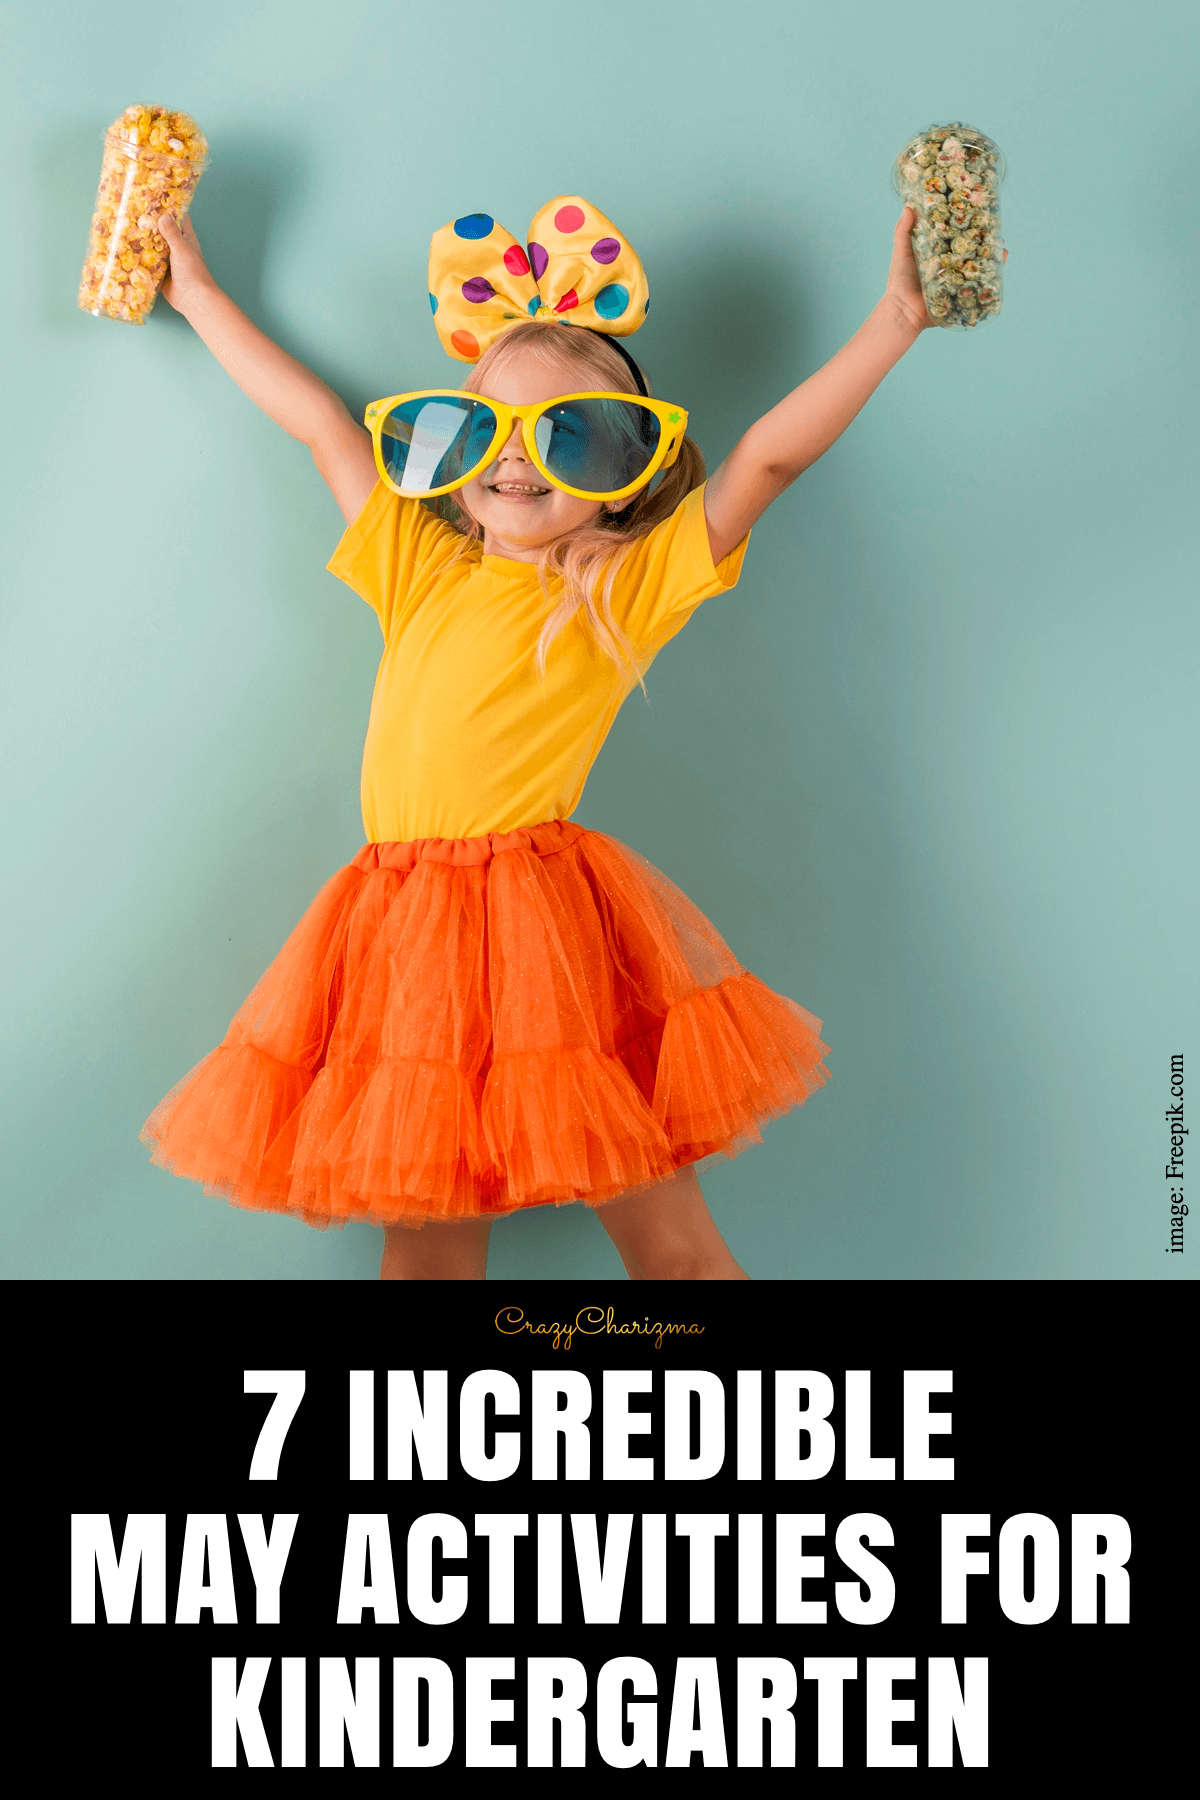 7 Incredible May Activities for Kindergarten to Use in 2022